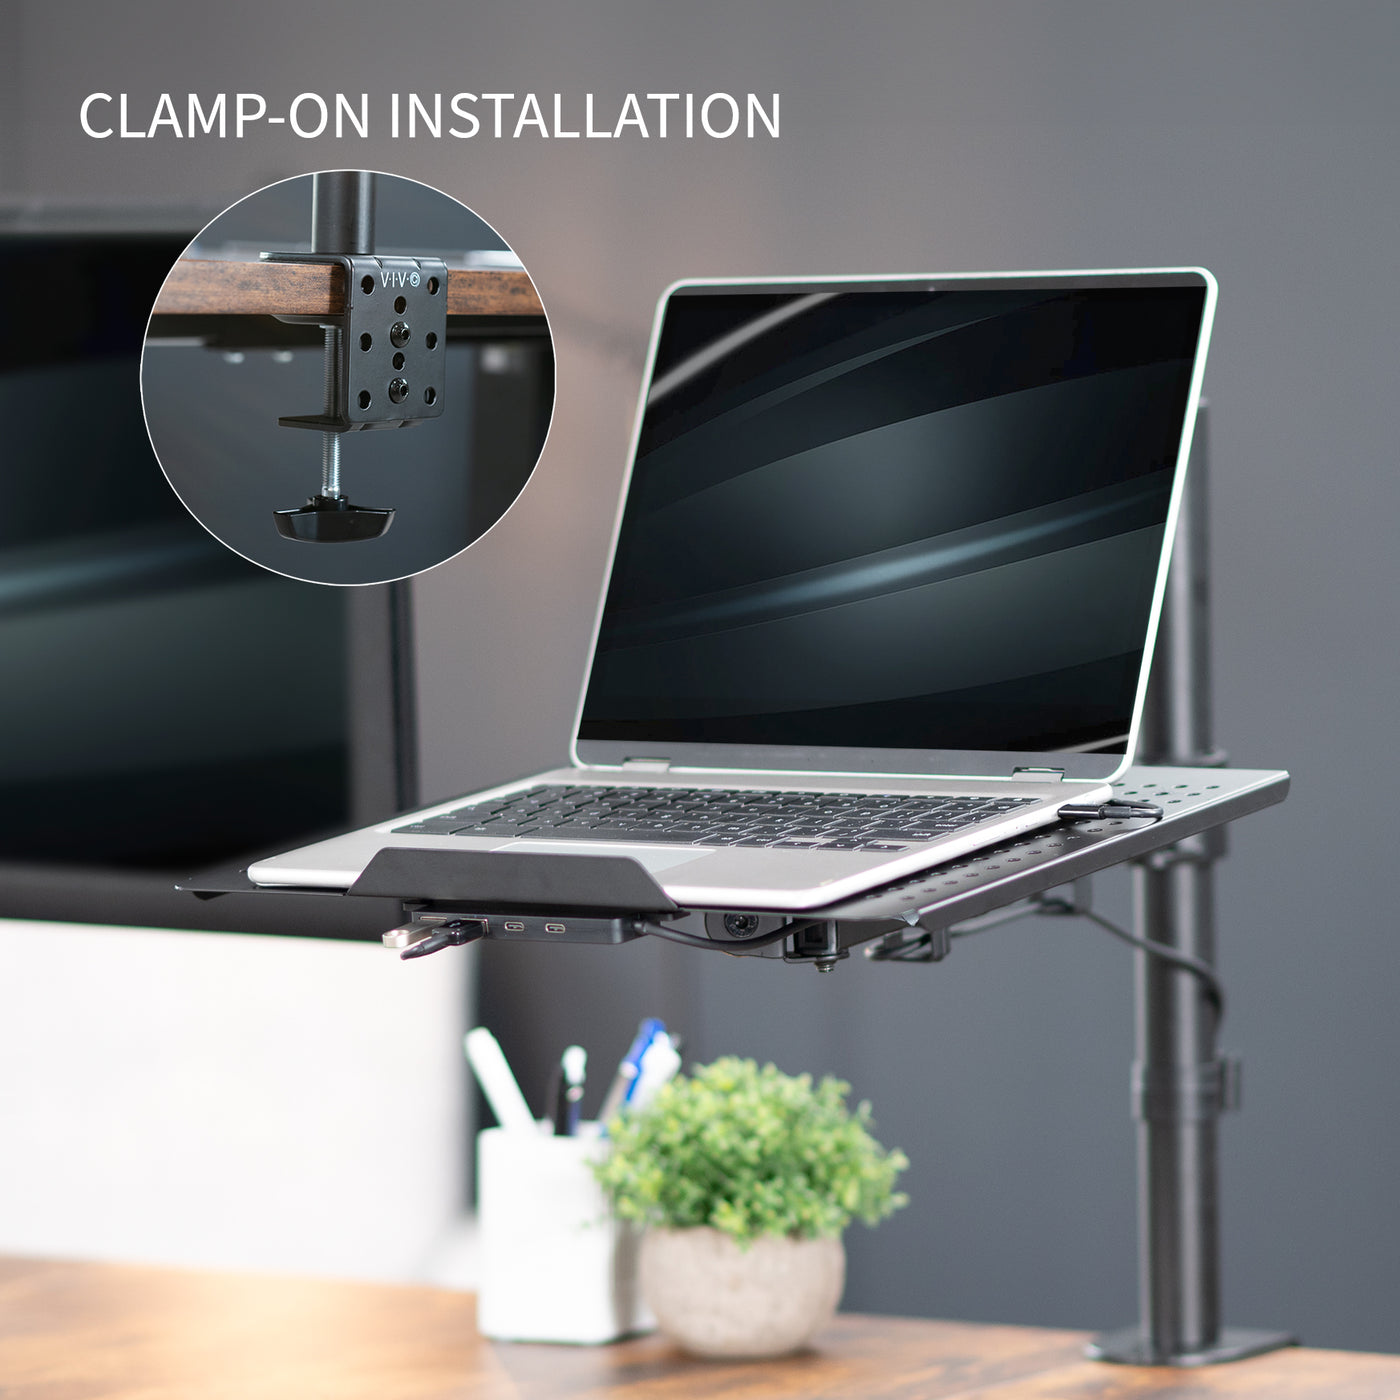 Height adjustable clamp-on laptop stand with USB ports, ventilation, and cable management.